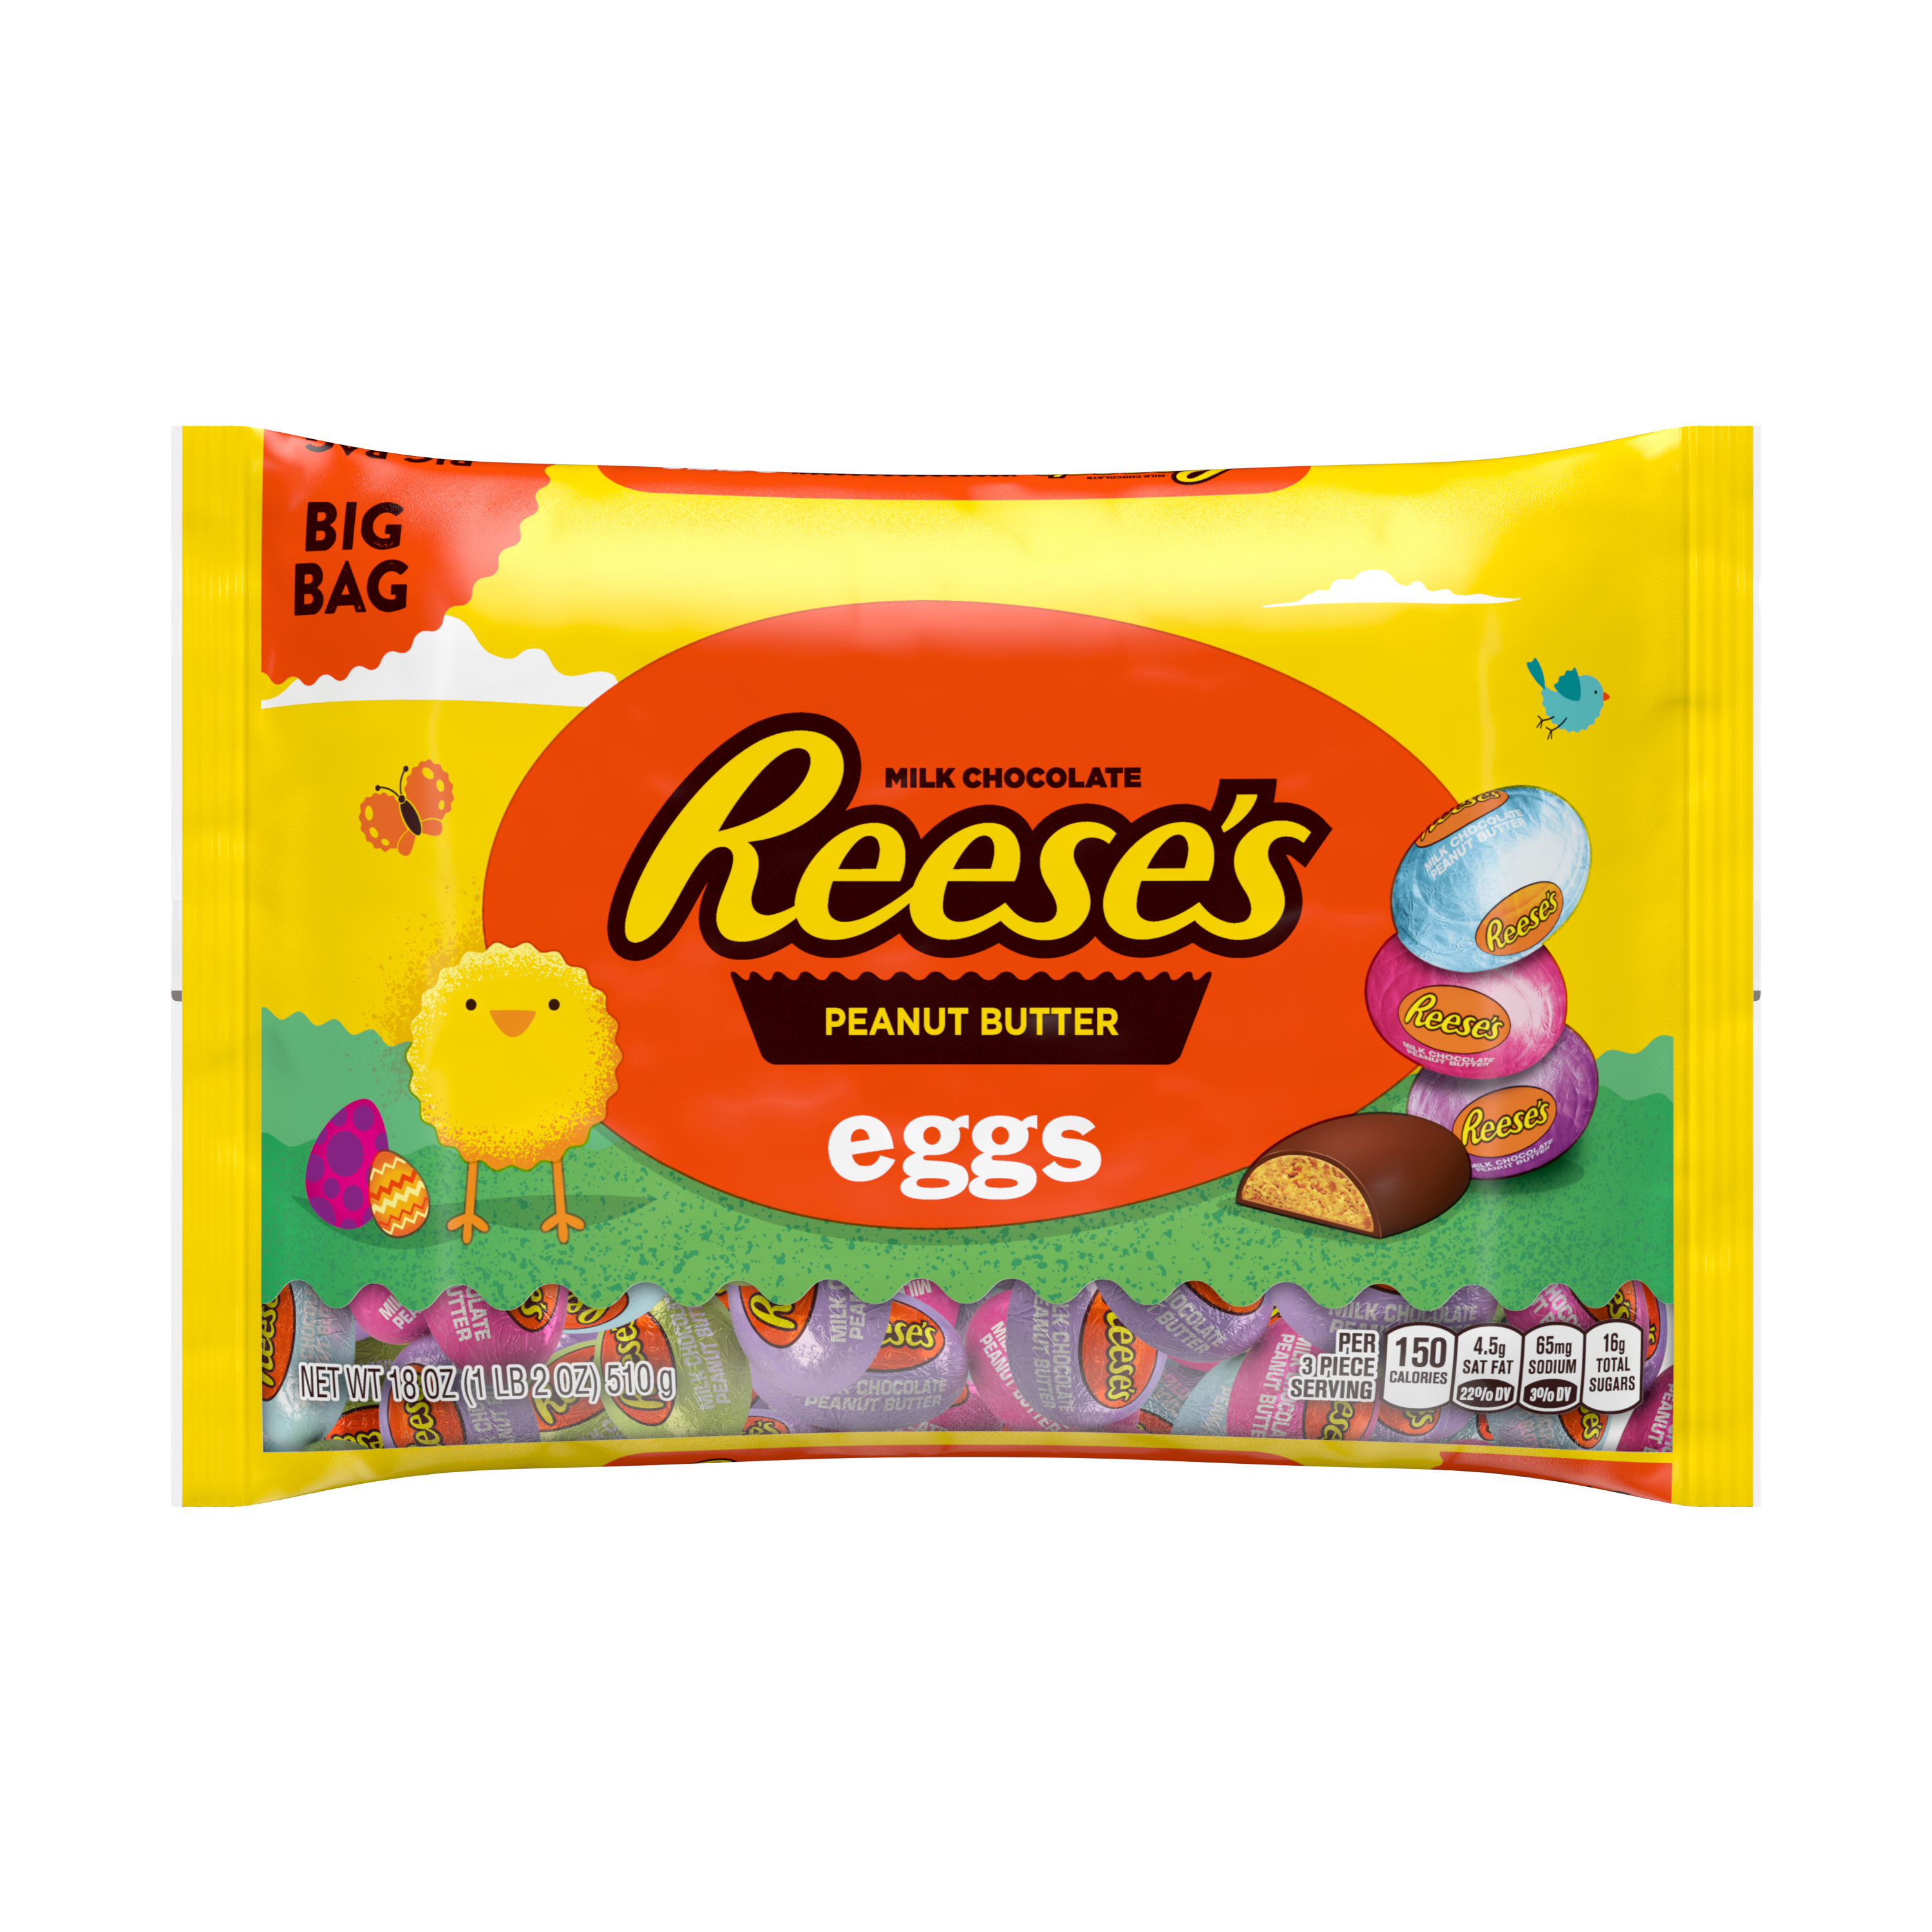 REESE'S Milk Chocolate Peanut Butter Eggs, 18 oz big bag - Front of Package